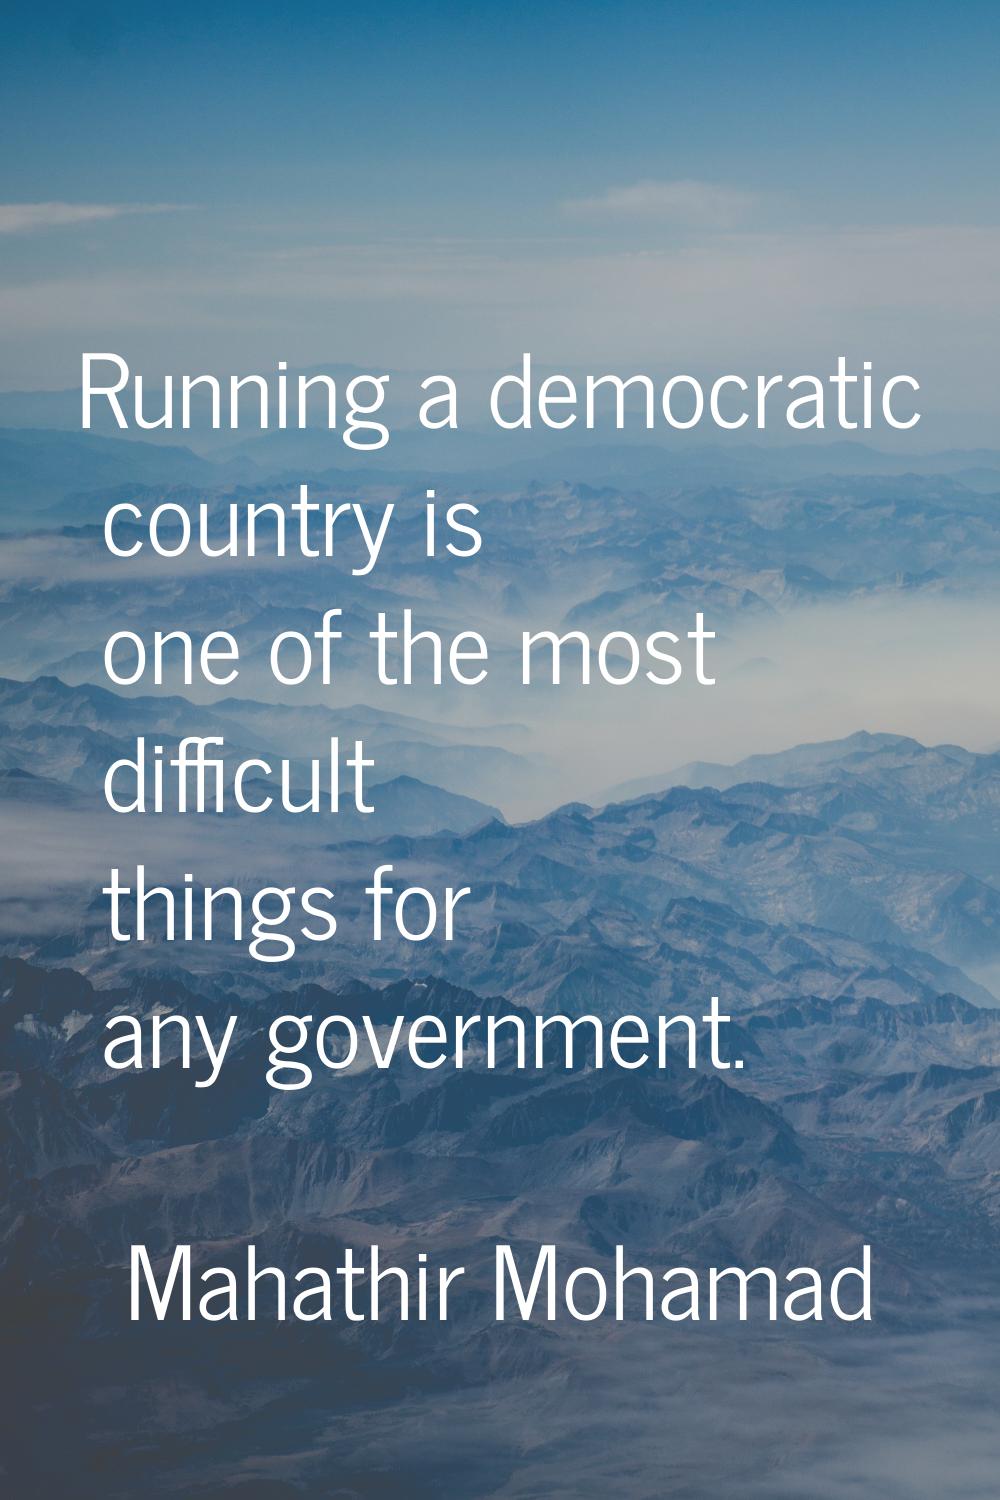 Running a democratic country is one of the most difficult things for any government.